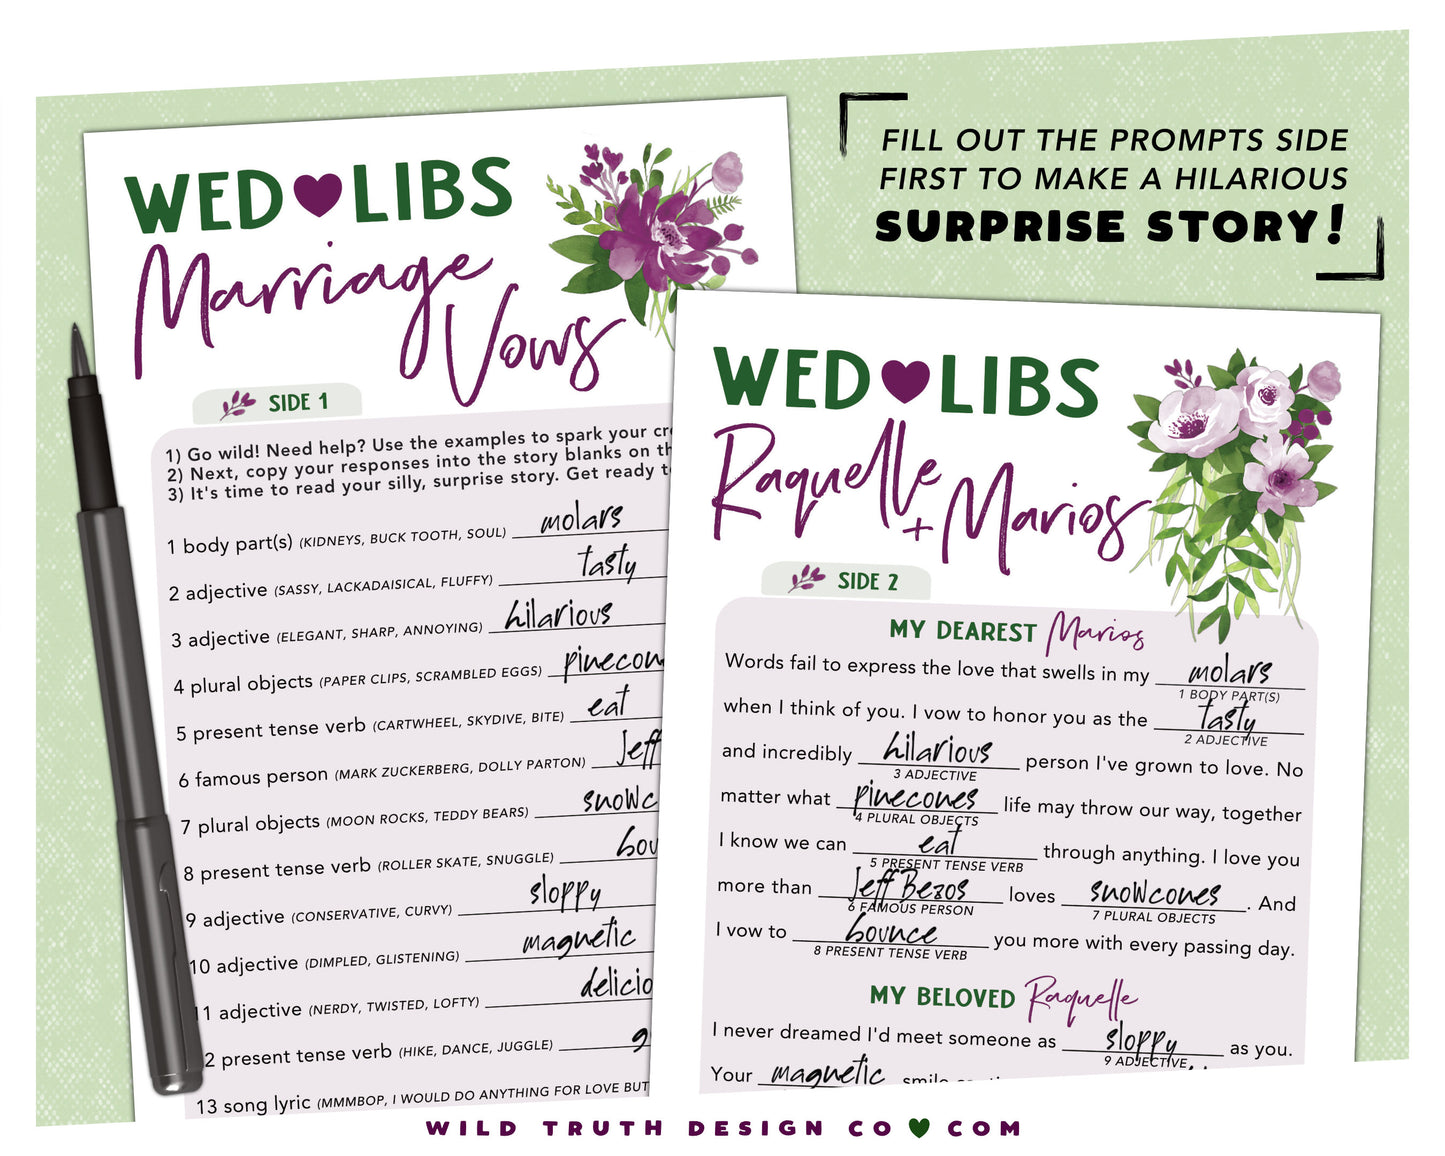 Personalized Wed Libs - Printed Cards - Marriage Vows Madlib Game - Wedding Guest Book - Floral Tropical Plants - Rehearsal Dinner - Engagement Party - Bridal Shower - Reception - Bachelorette - Couples Shower Mad Lib